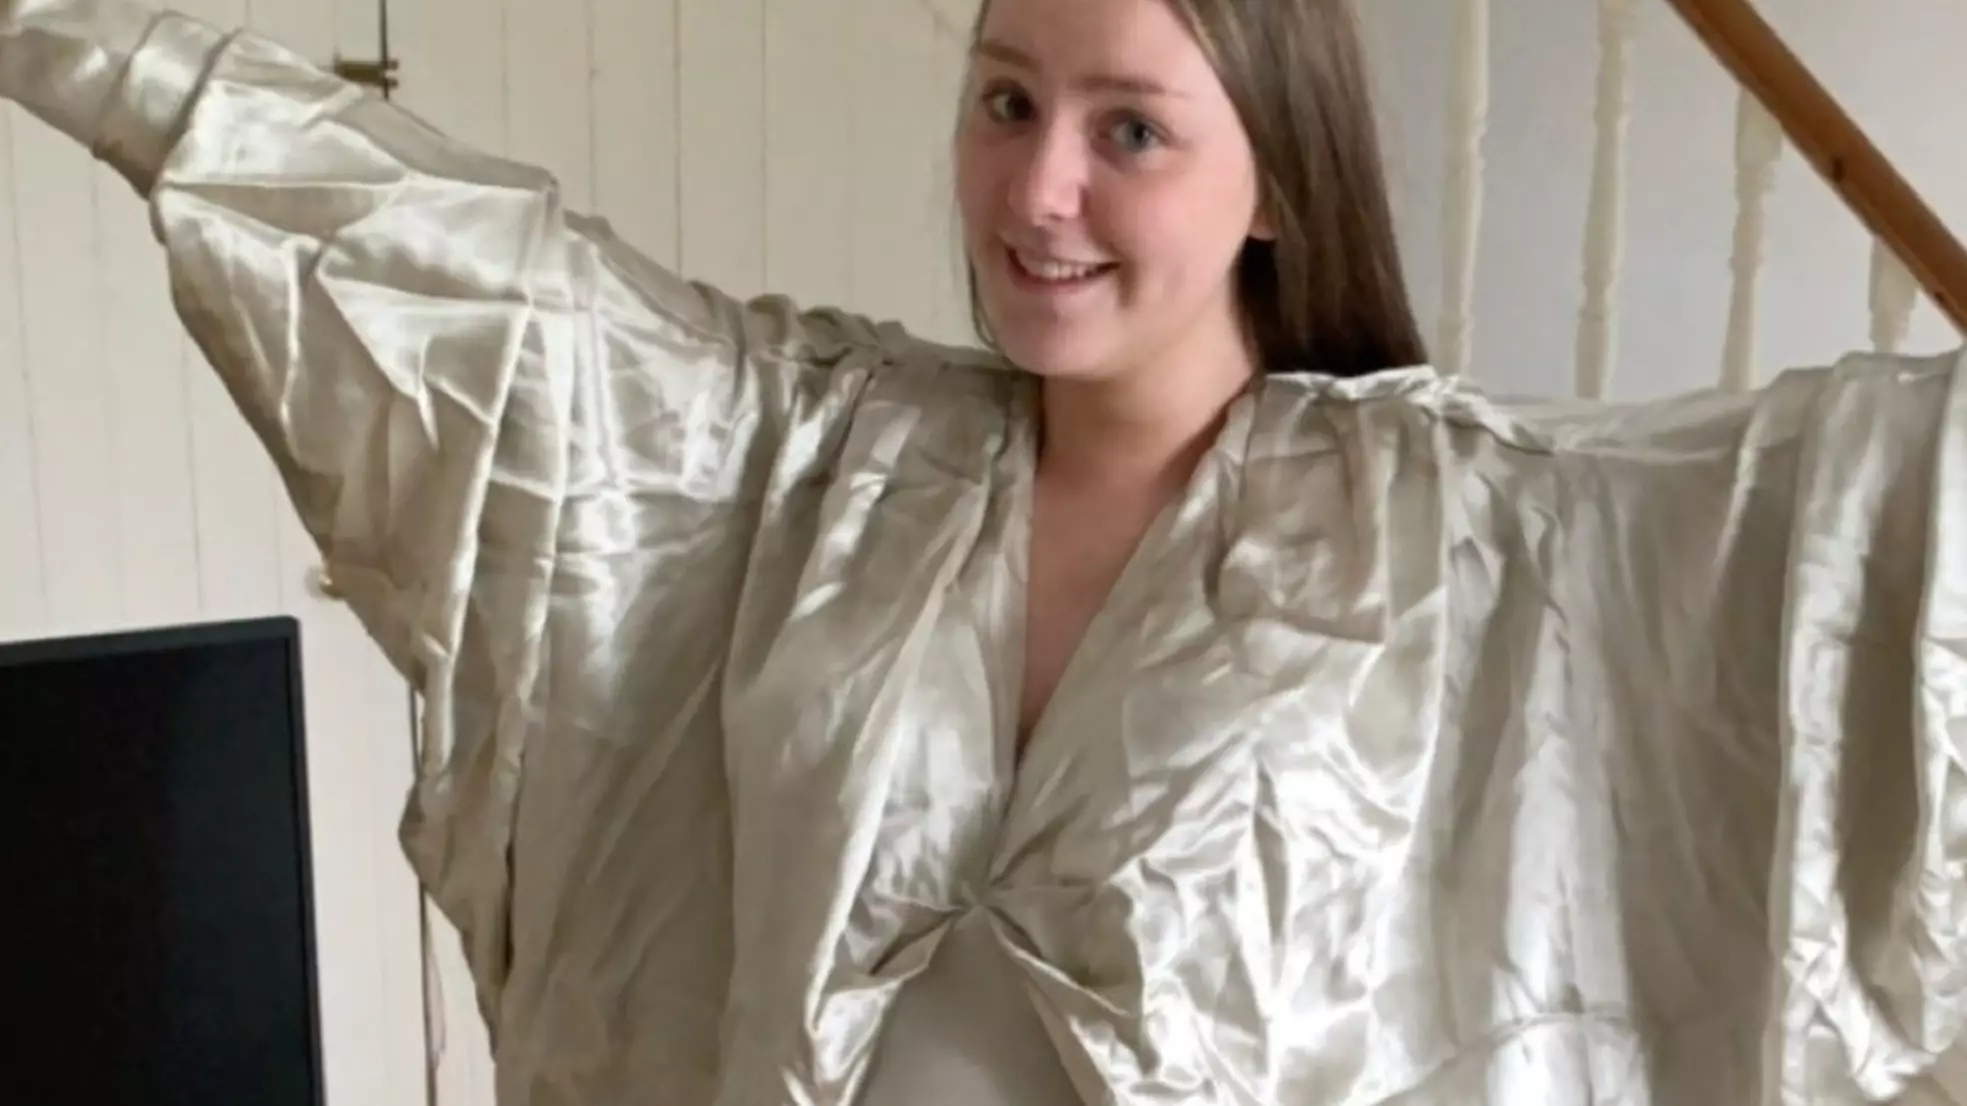 Woman Left 'Looking Like One Of Jesus' Disciples' In Over-Sized Dress 